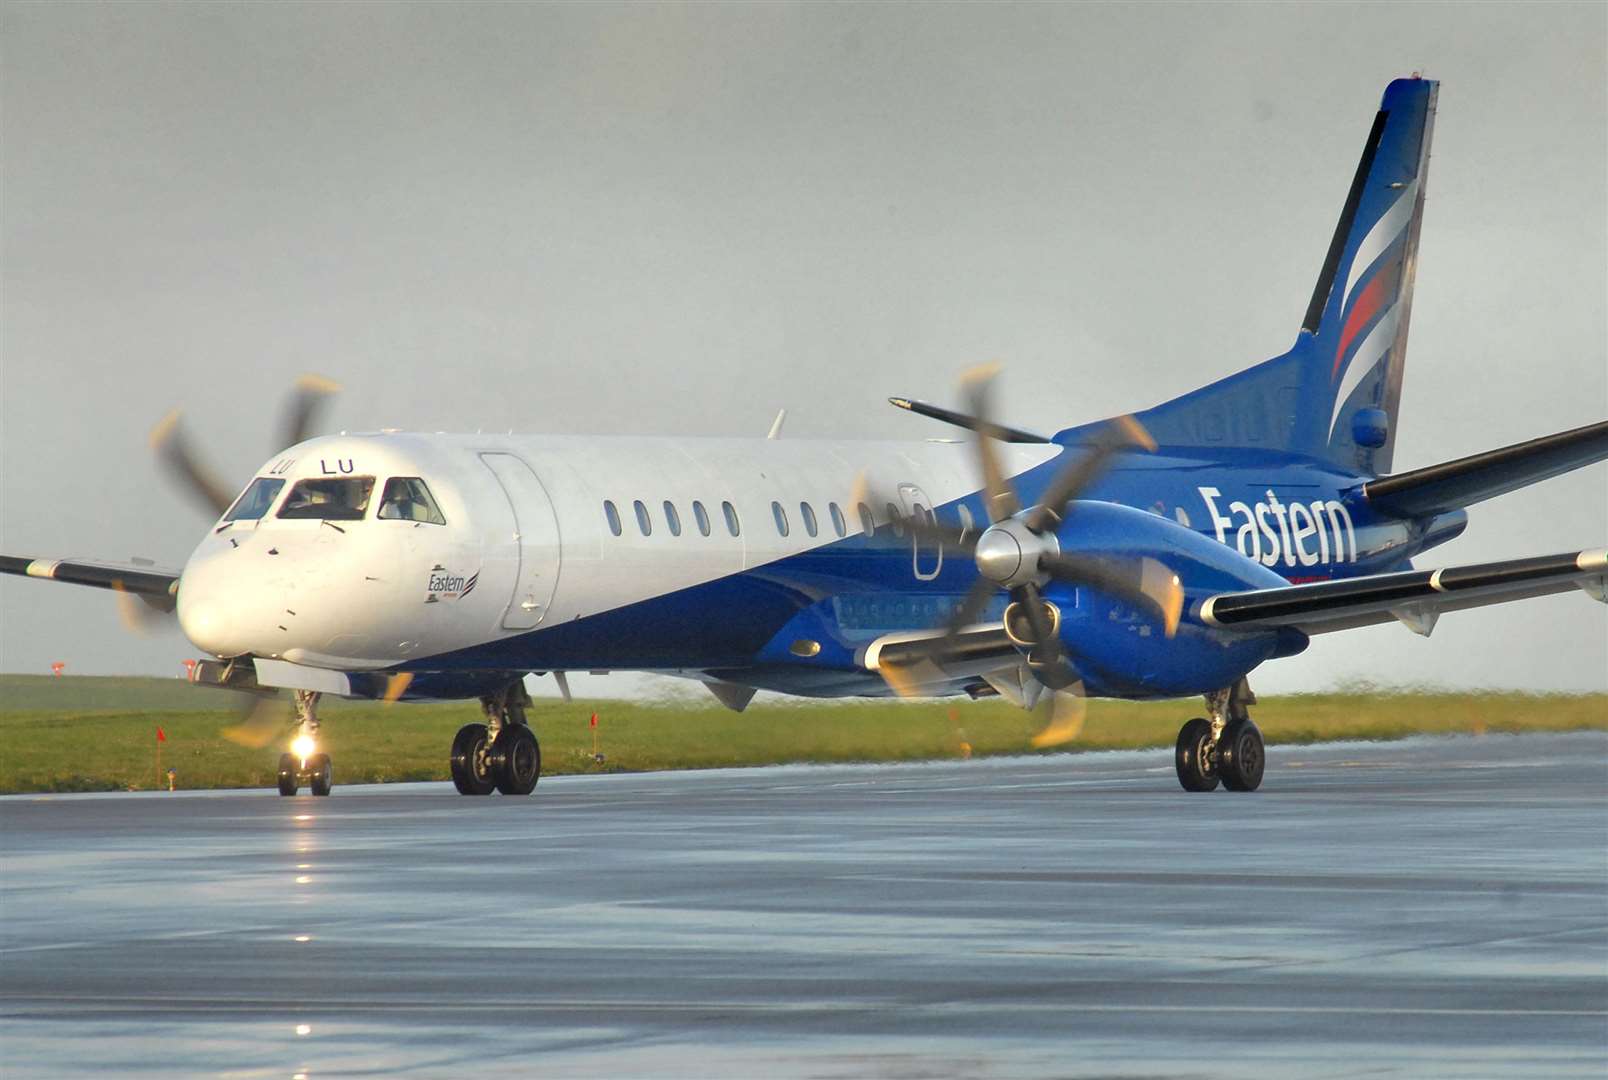 Eastern Airways has announced it will take over the Aberdeen - Birmingham route